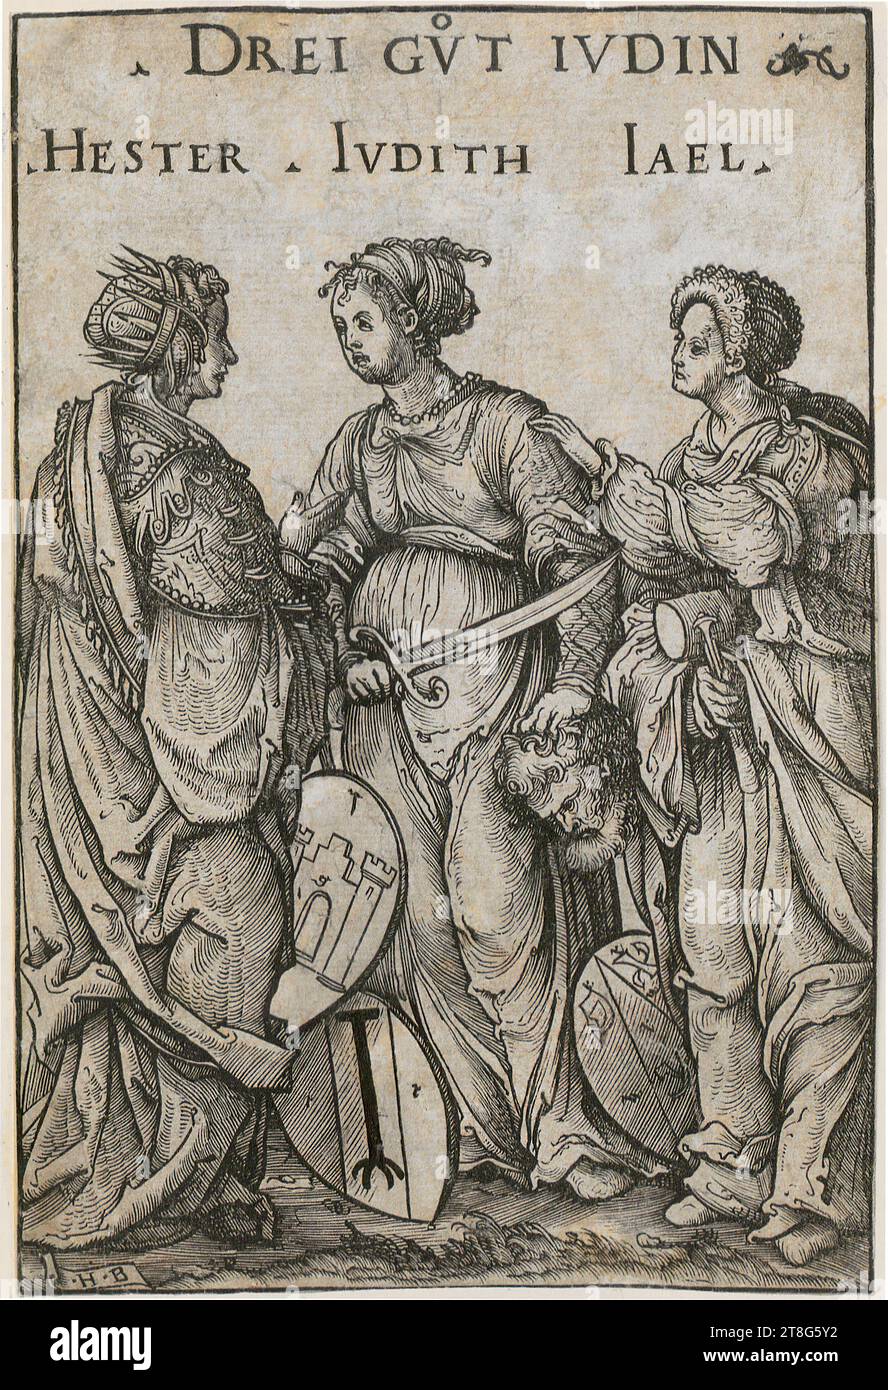 Hans Burgkmair (1473 - 1531), Three Good Jewesses, sheet 4 of the set 'Heroes and Heroines', print date: 1516 - 1519, woodcut, sheet size: 19.2 x 12.8 cm, inscribed at top center '. THREE GVT IVDIN, . HESTER . IVDITH IAEL.' and monogrammed lower left Stock Photo